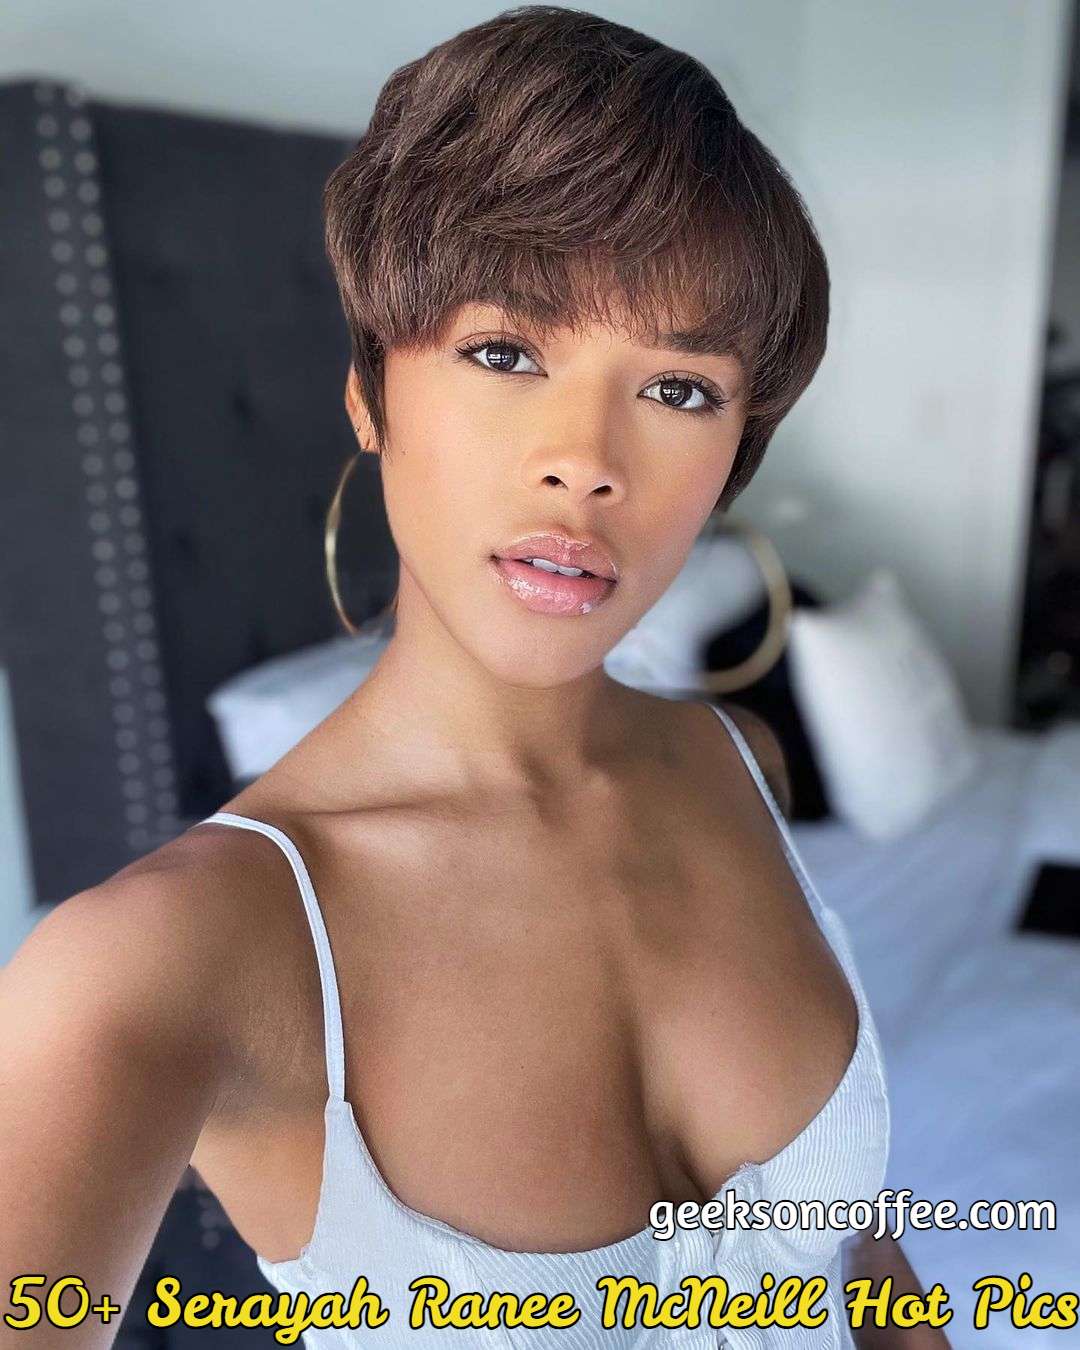 Serayah Ranee Mcneill Hot Pictures Can Make You Fall In Love